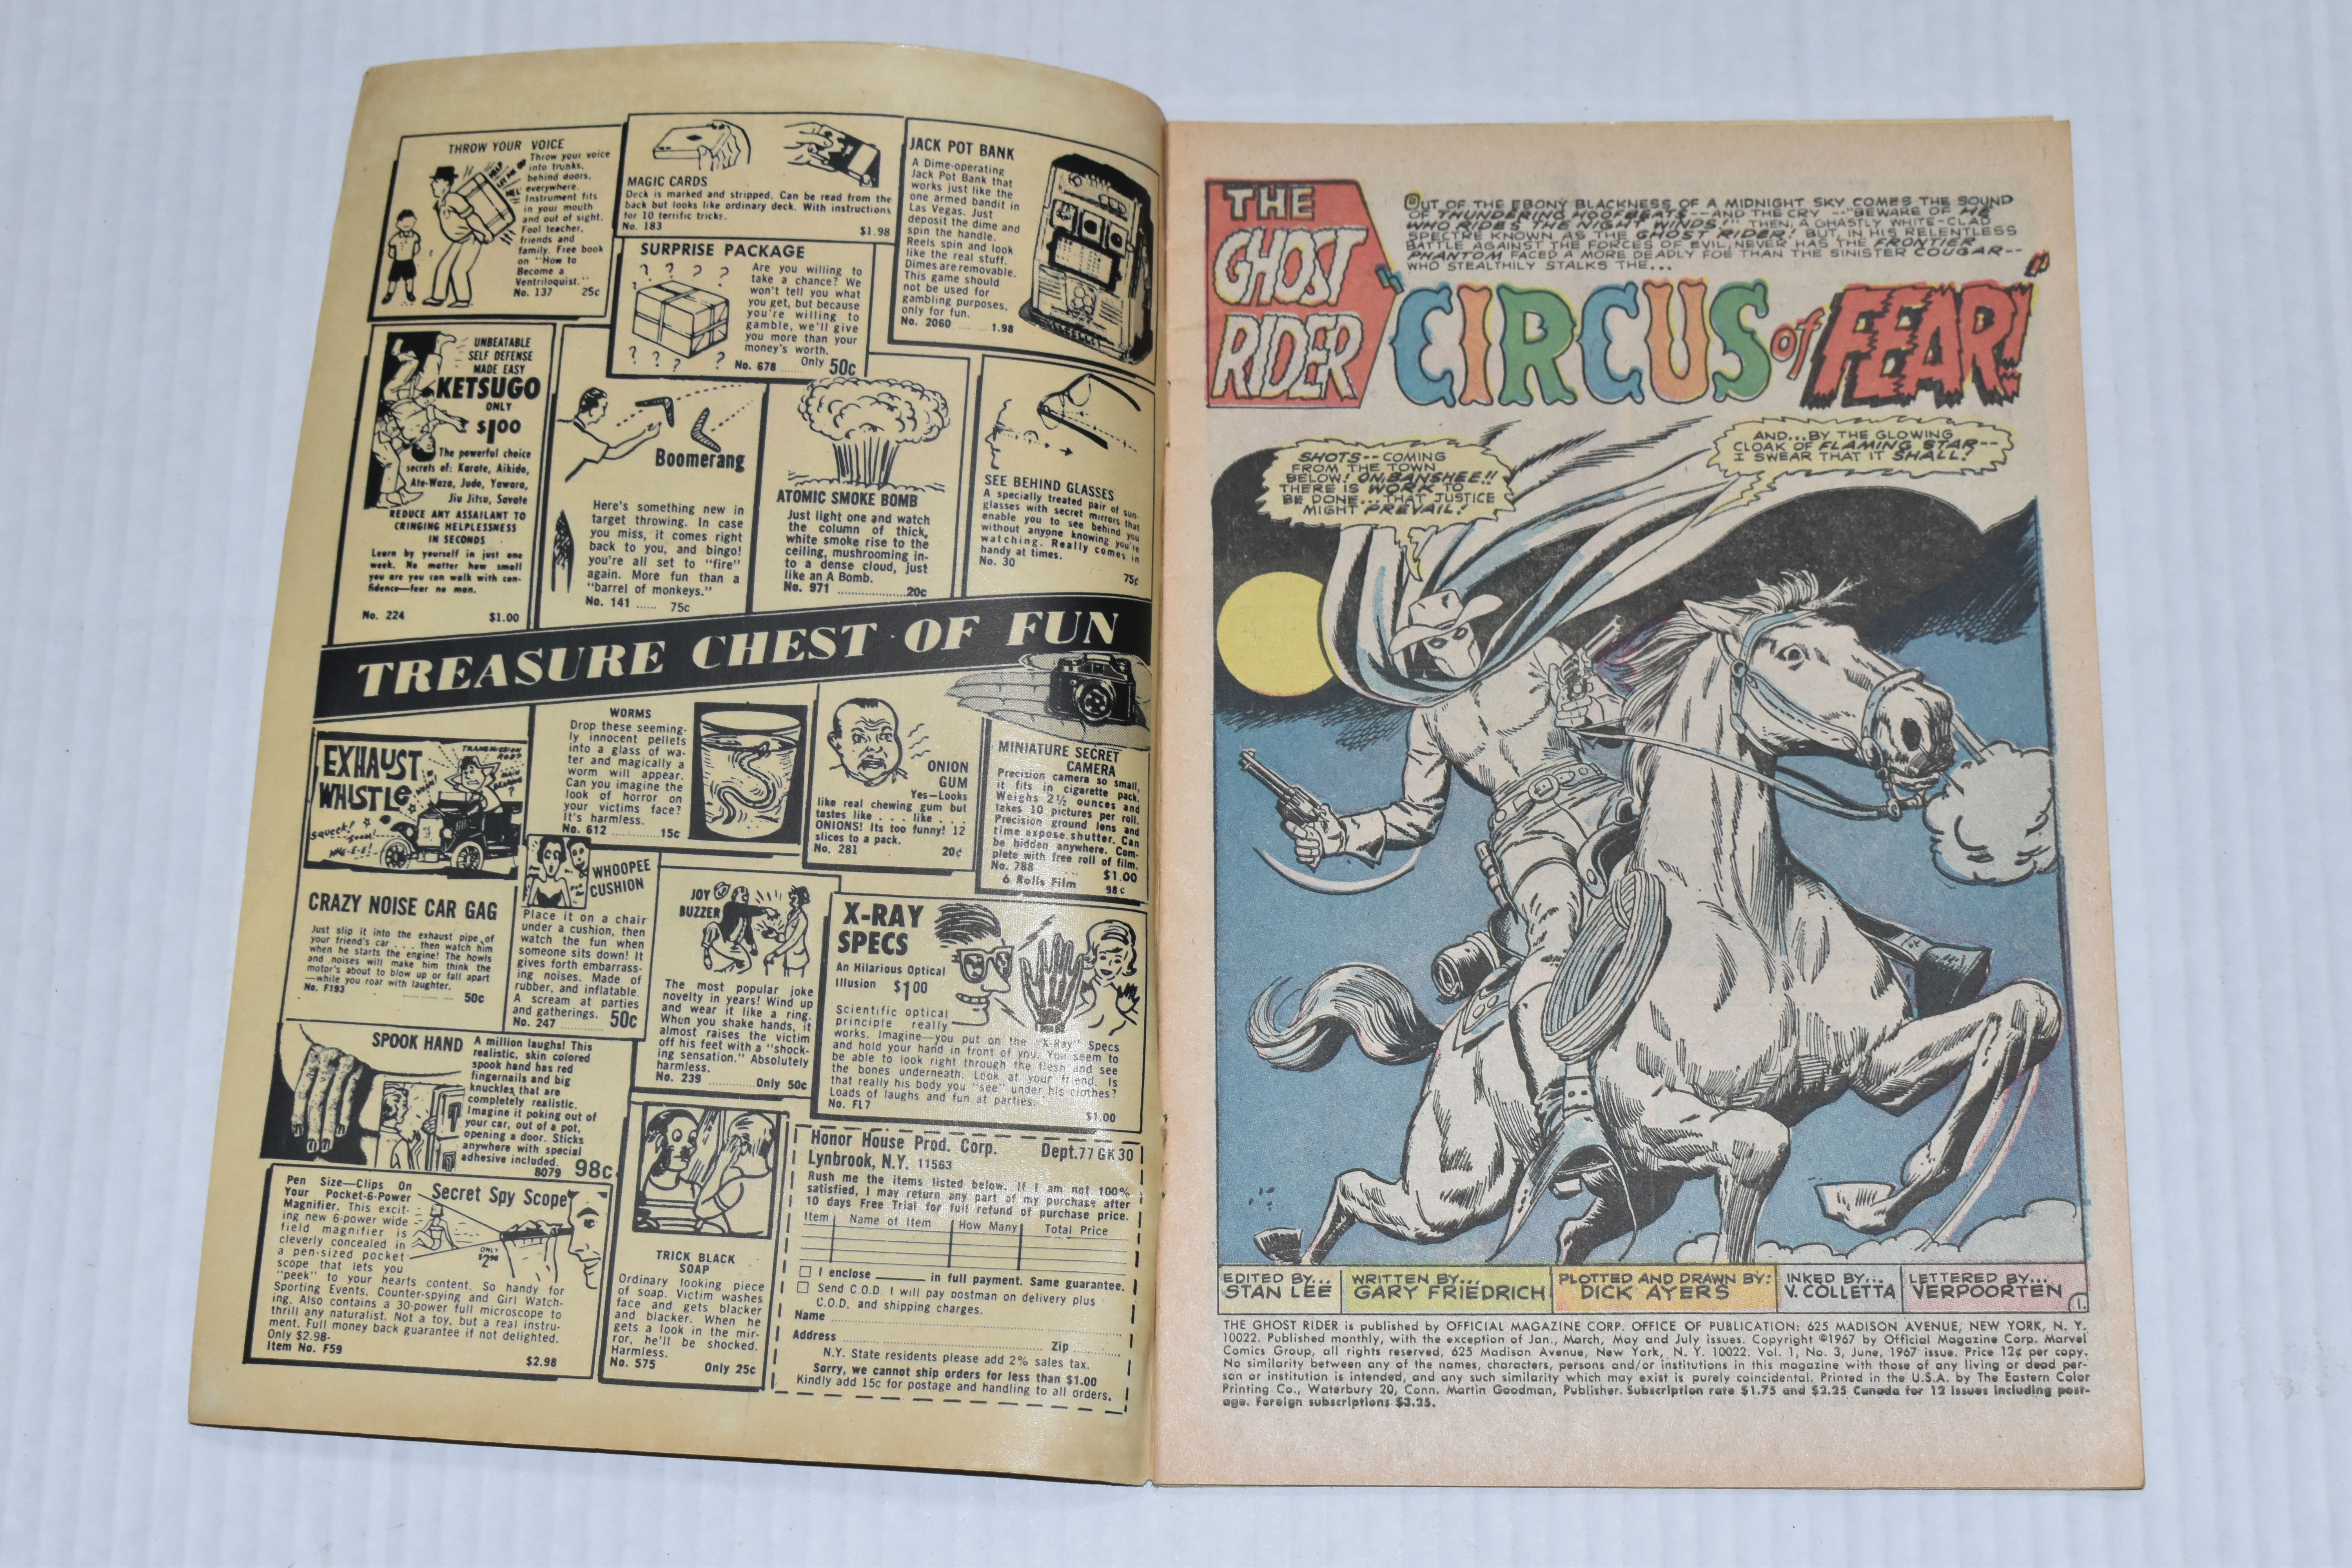 COMPLETE ORIGINAL GHOST RIDER VOLUME 1 MARVEL COMICS, features the first appearance of the - Image 17 of 25